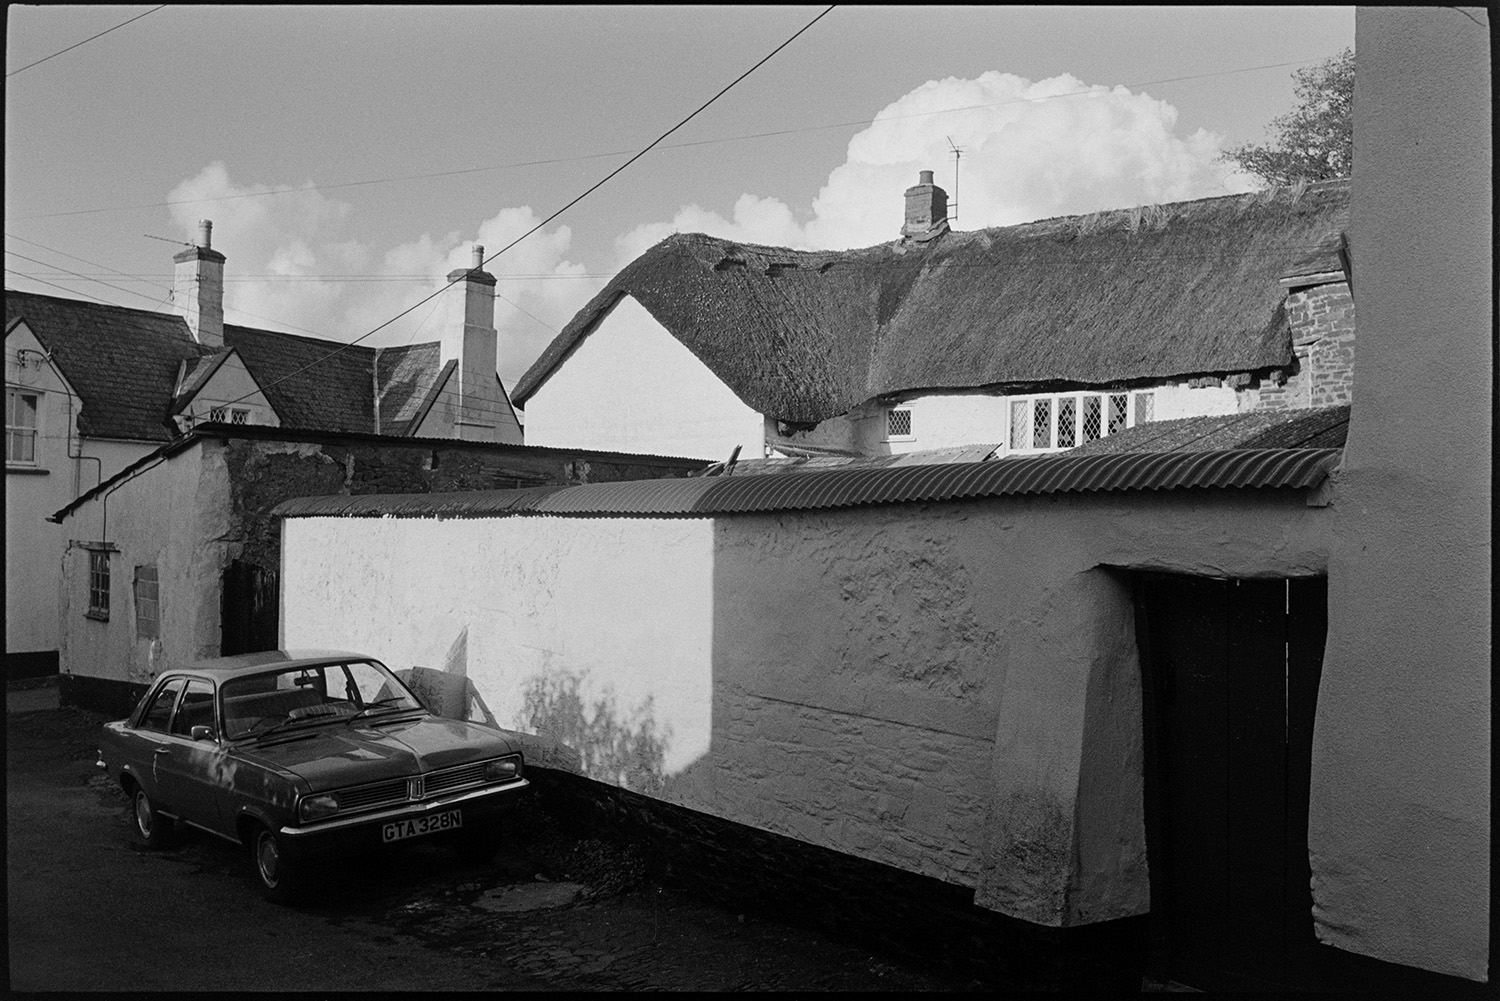 Street scenes, cottages, pub and chemist, mothers and children. 
[A car parked by a wall with a corrugated iron cap in a street in Chulmleigh. A thatched cottages can be seen behind the wall.]